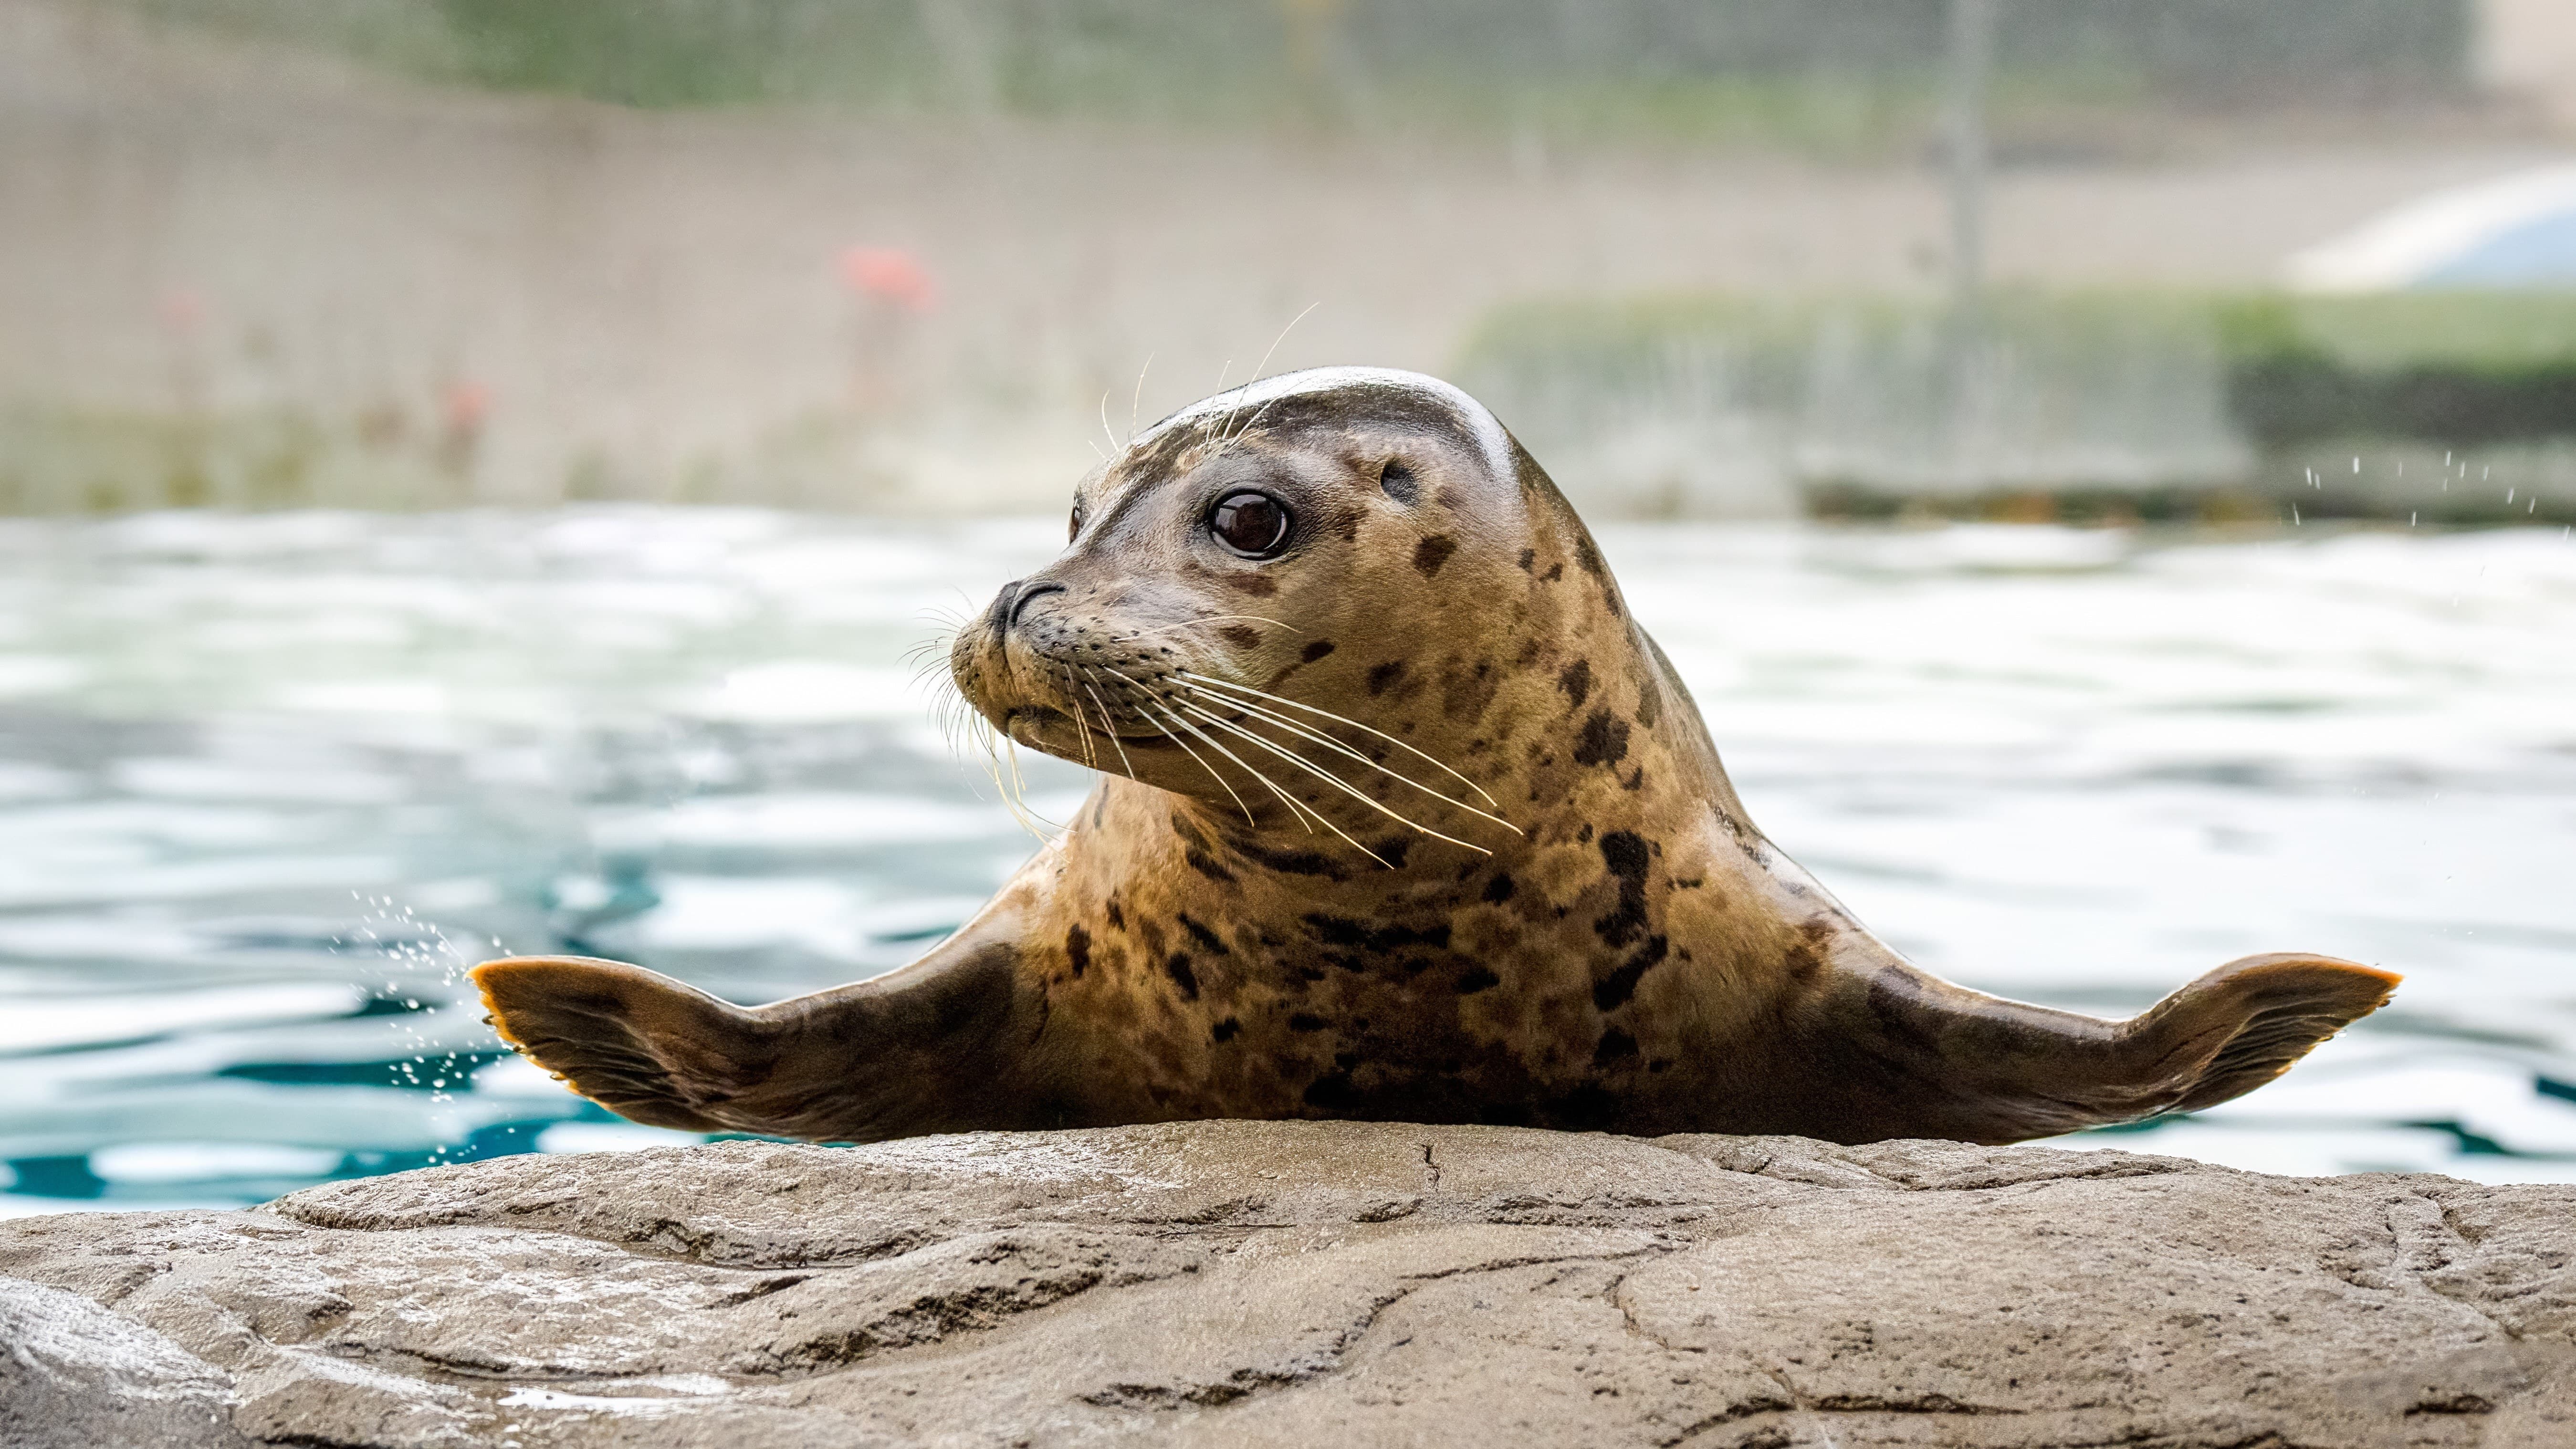 Javier the harbor seal spreads his flippers out wide while looking off to the side from his rock